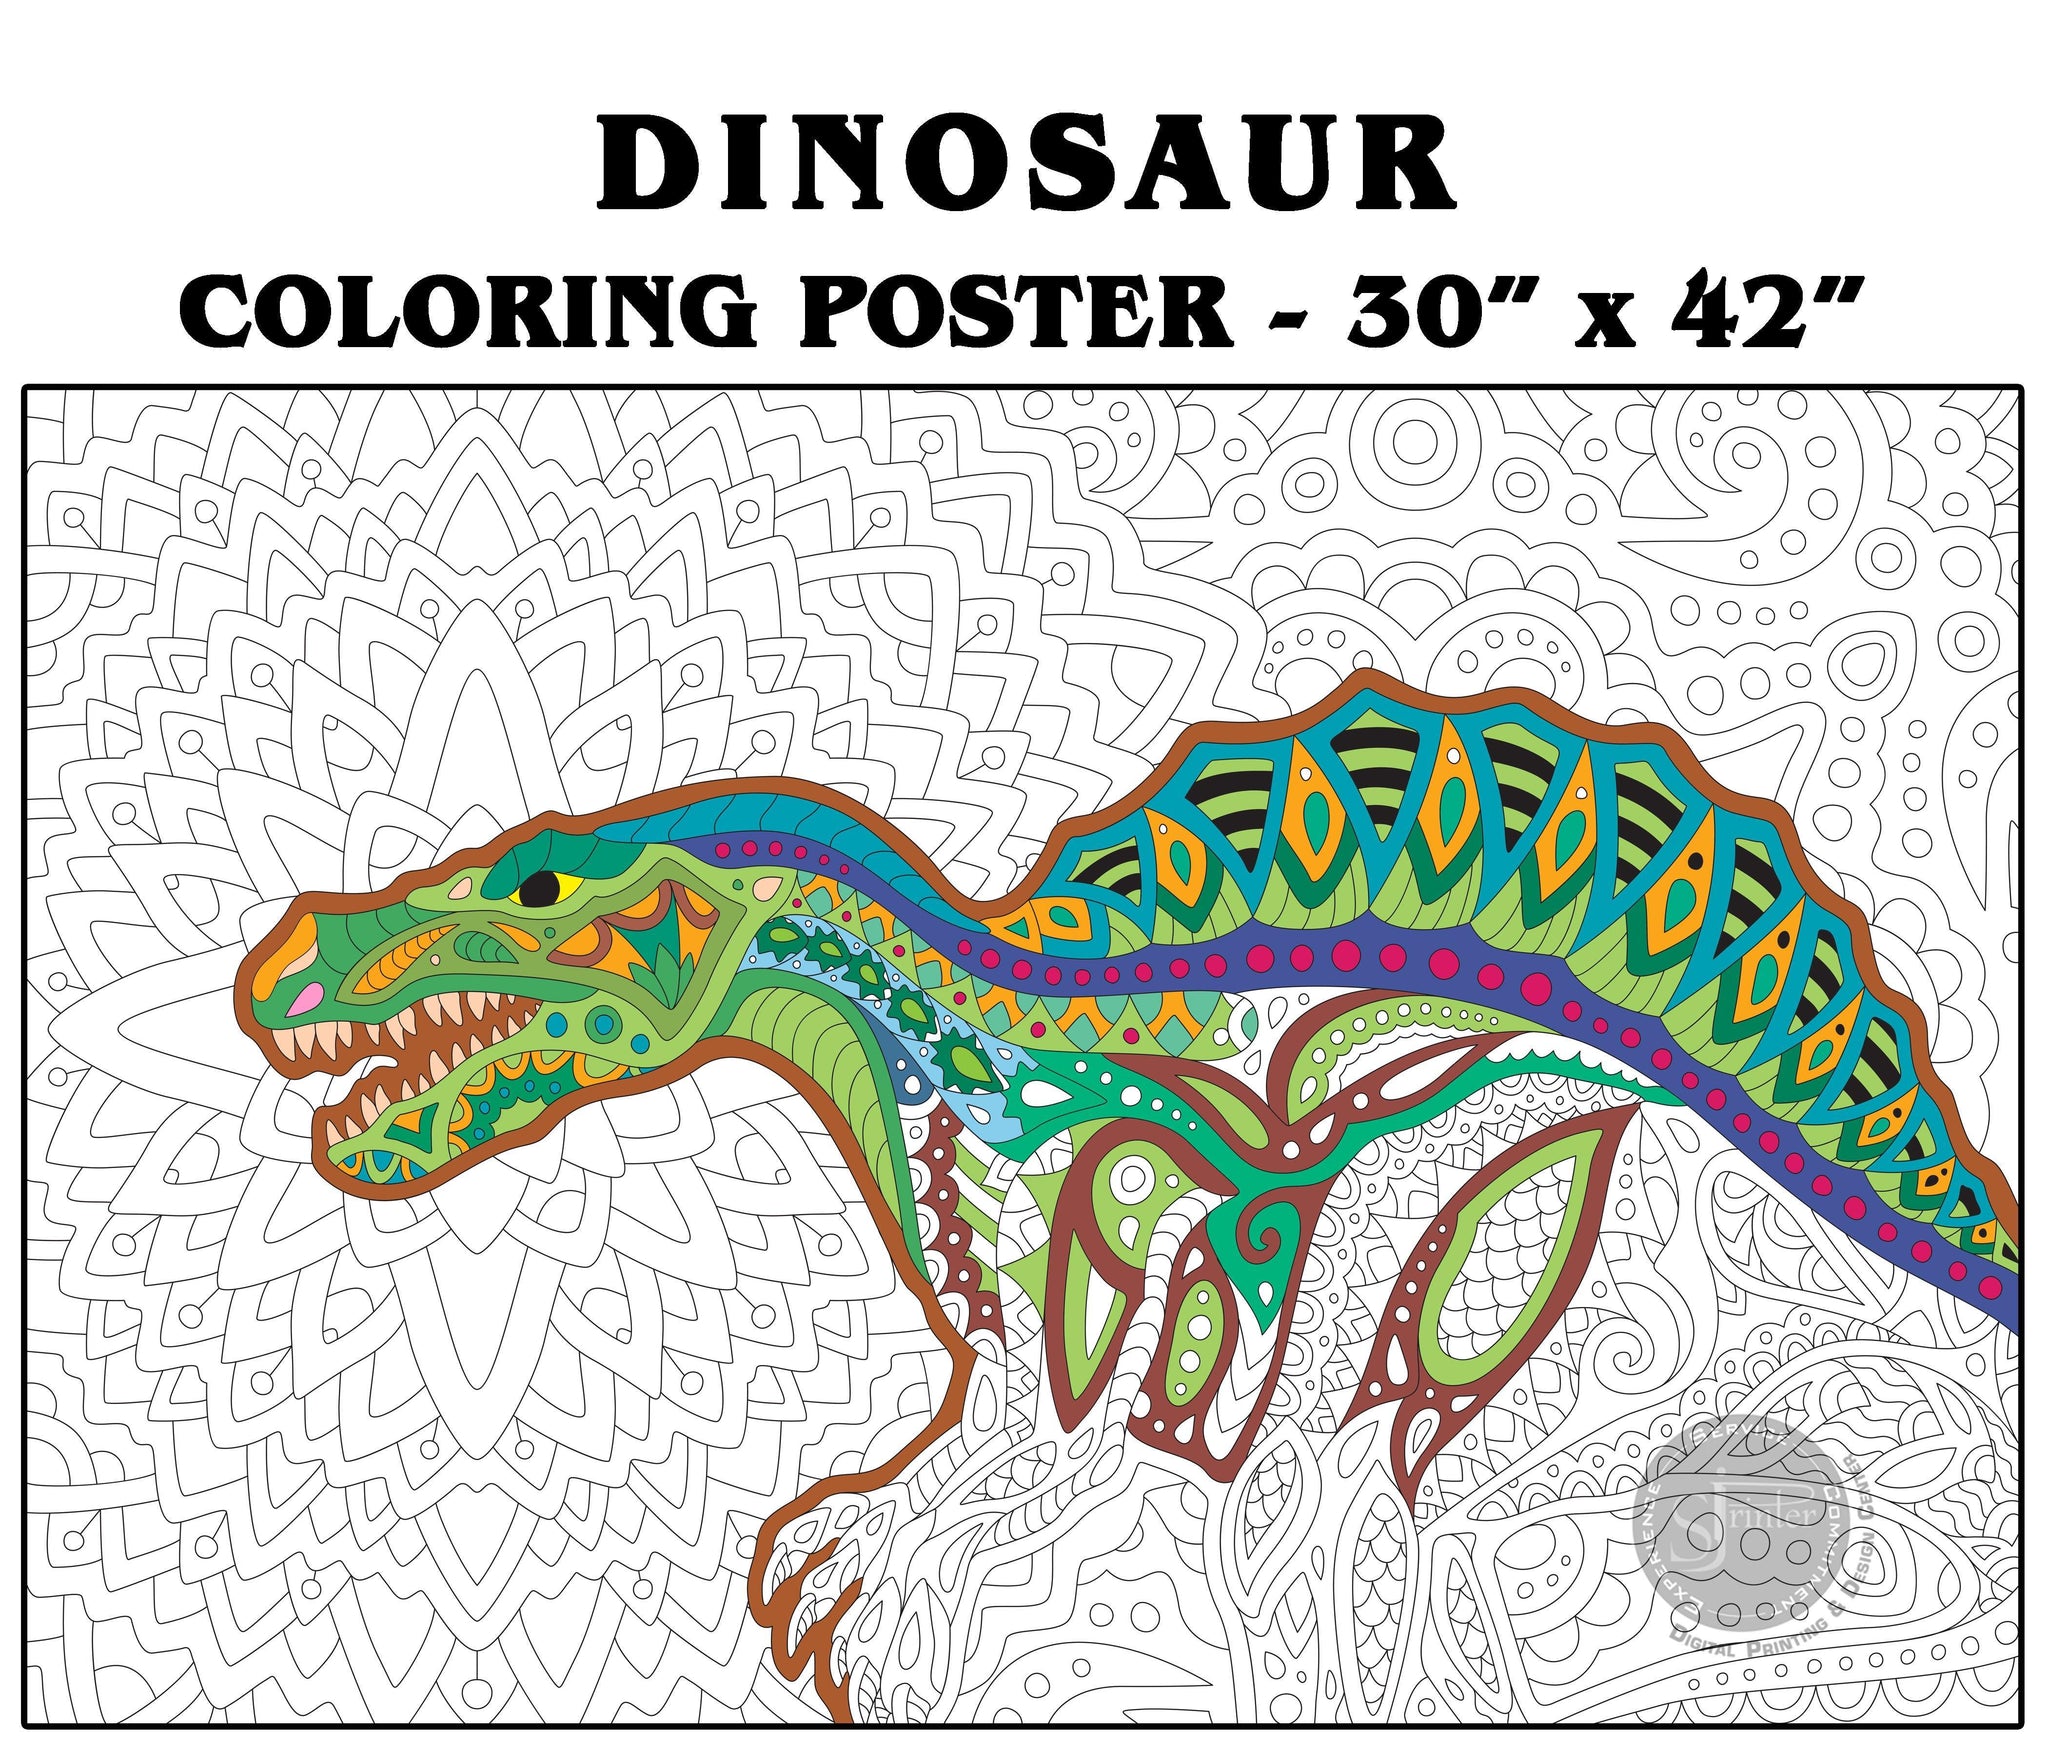 Omy Giant Coloring Poster, Dinosaurs, 40 x 28 inches, Coloring fun for  Kids, Adults, and the Whole Family, Dinos of every shape and size